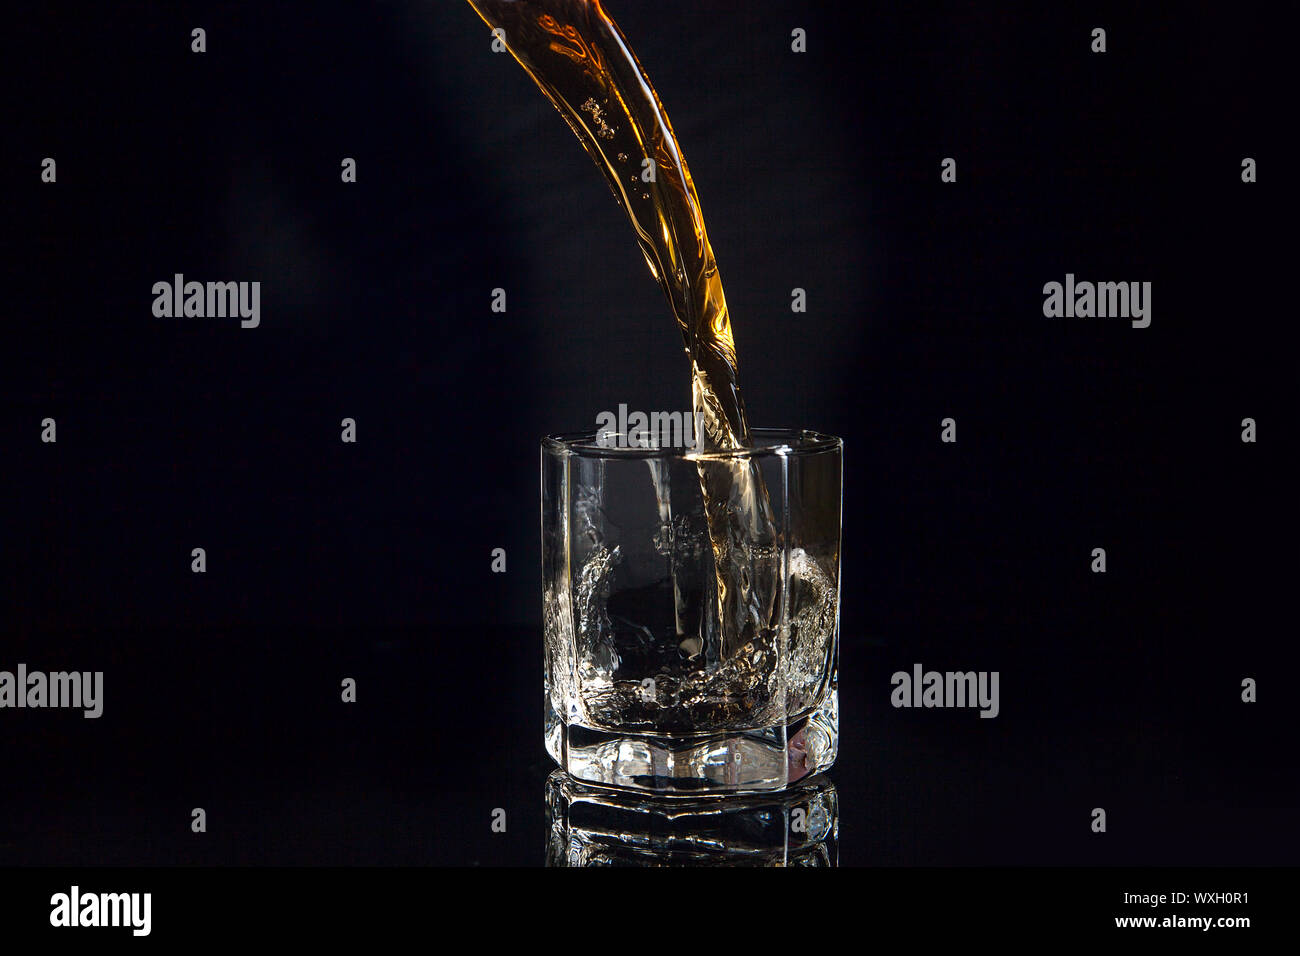 https://c8.alamy.com/comp/WXH0R1/whiskey-pouring-into-glass-with-ice-isolated-on-reflective-black-surface-whiskey-splash-out-of-glass-many-drops-of-beverage-get-out-from-glass-WXH0R1.jpg